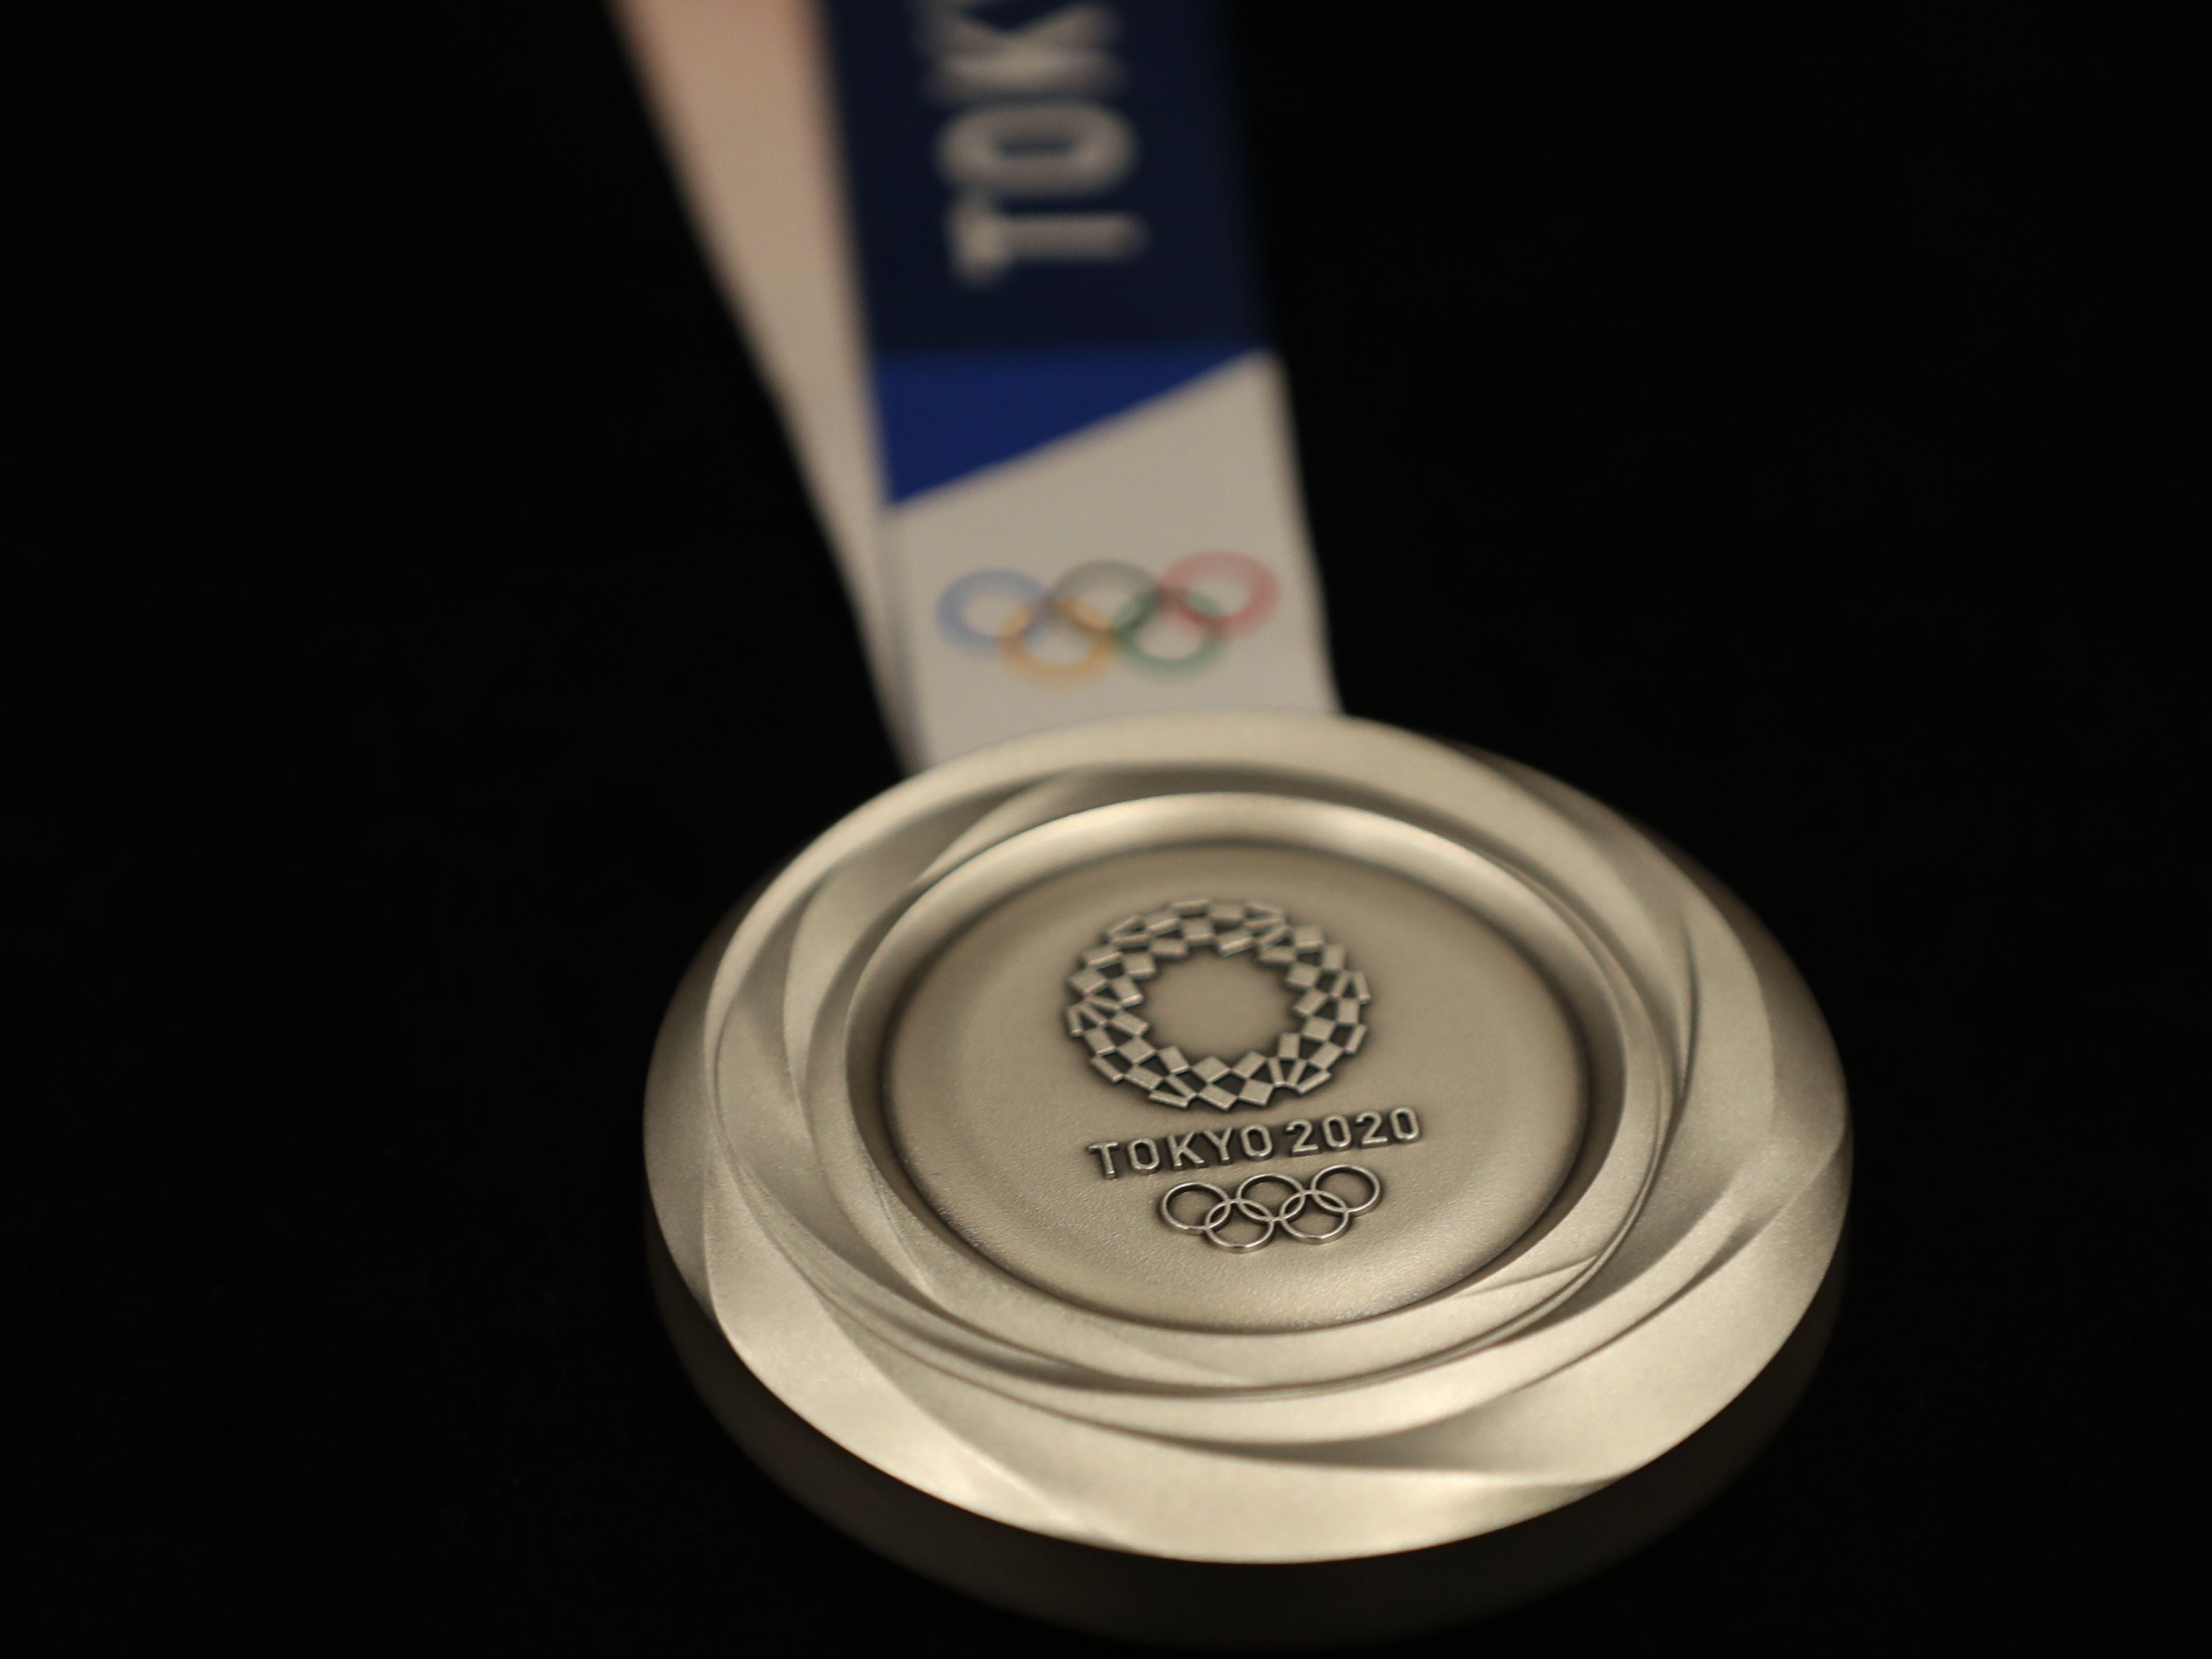 A closer view of the silver medal for the Tokyo 2020 Summer Olympic Games.